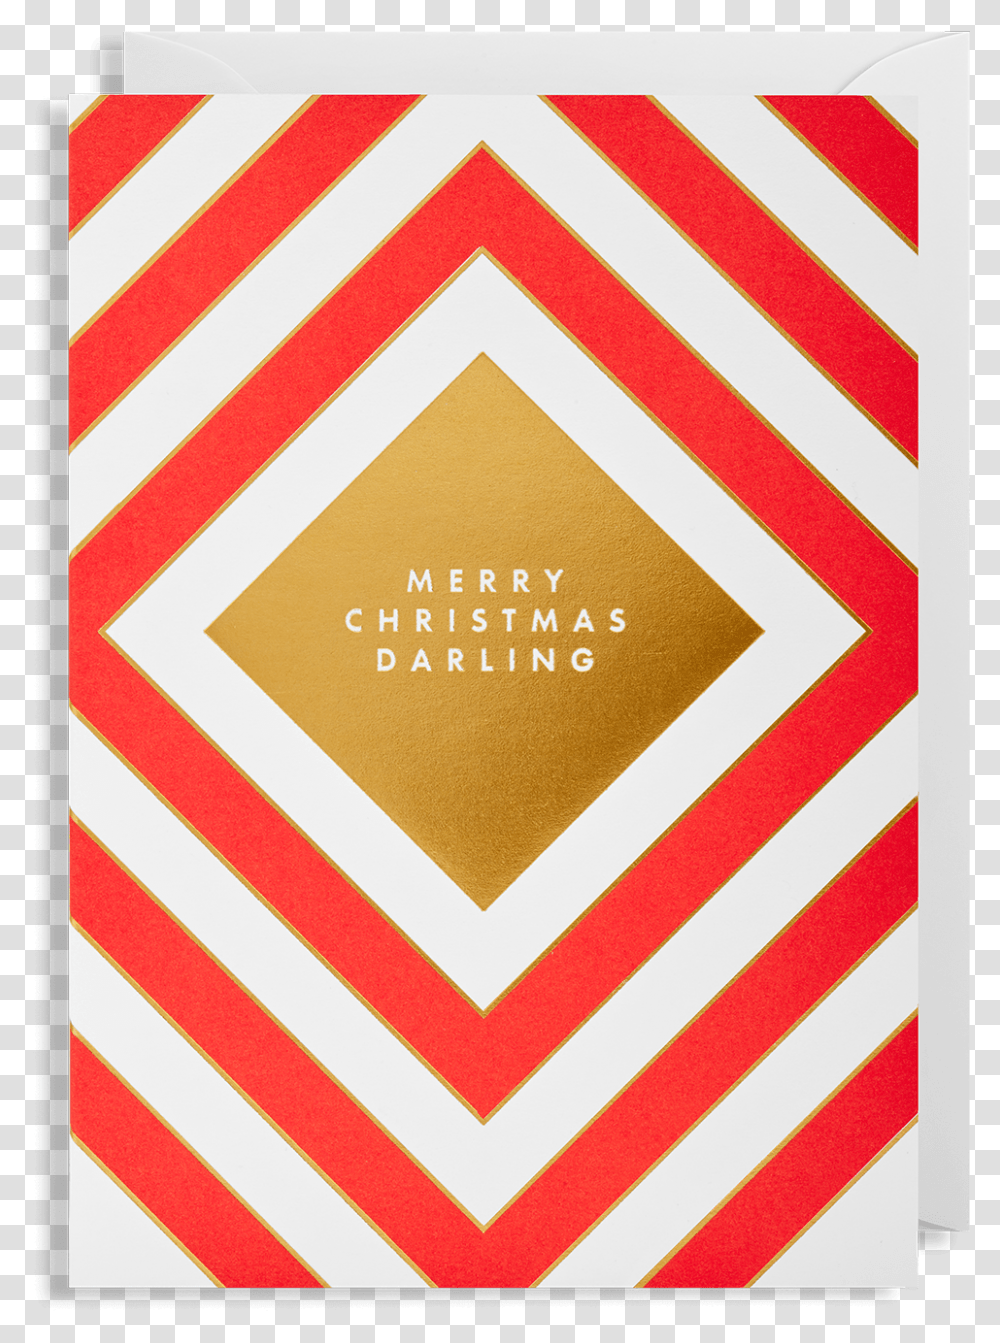 Merry Christmas Darling Christmas Card Symmetrical Wall Design, Envelope, Mail, Rug, Greeting Card Transparent Png